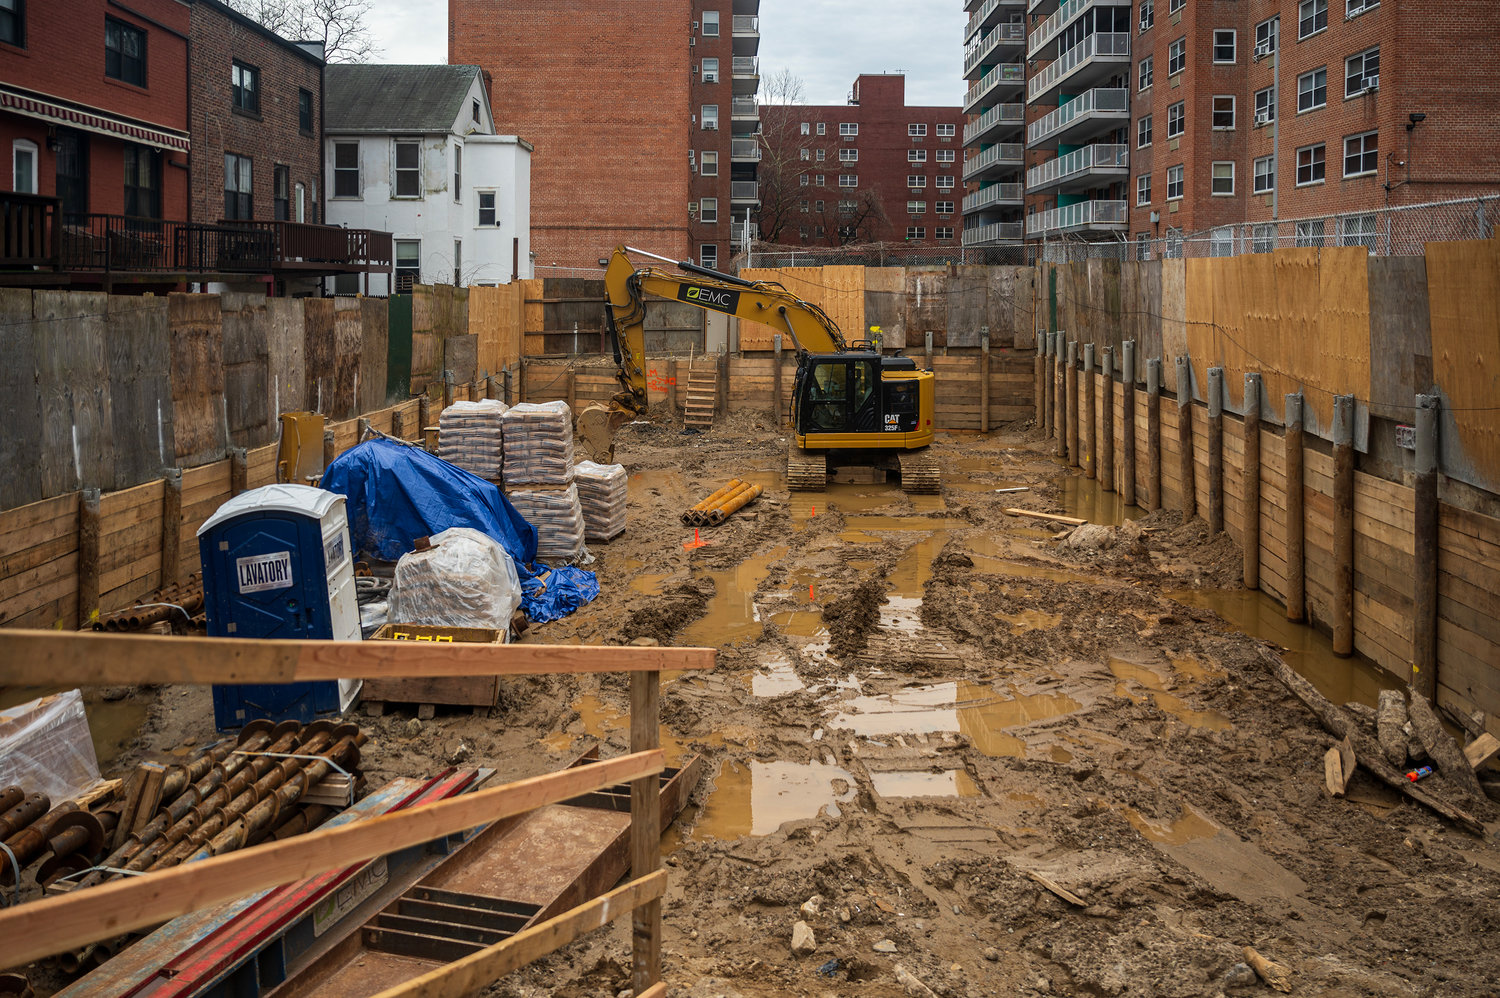 The construction site of the new International Leadership Charter Middle School at 306 West 232nd St. on March 6. The principal of the school, Evelyn Velez, announced her resignation recently due to pressure to get the latest Covid vaccination.